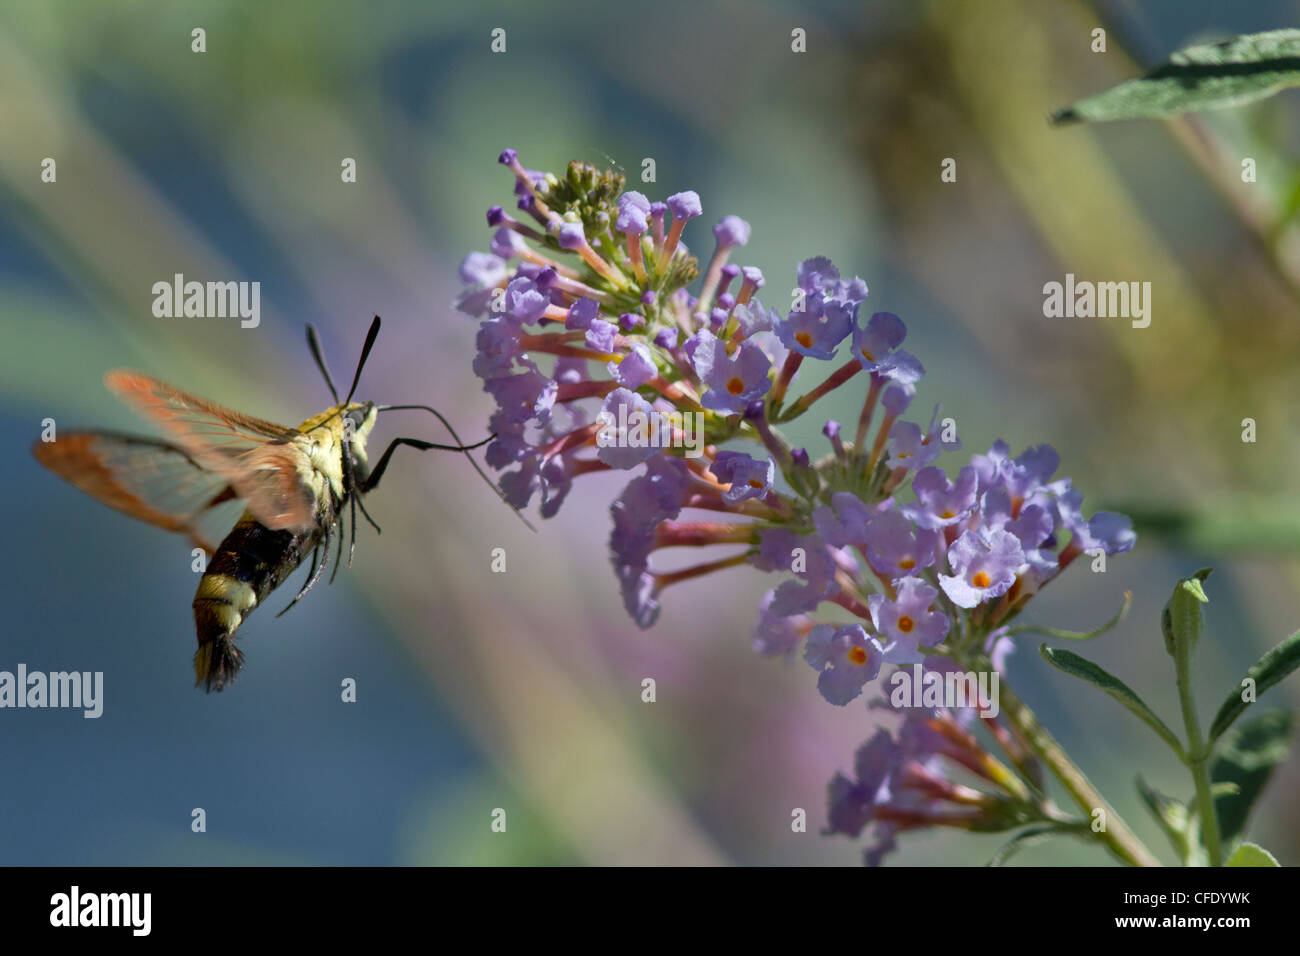 A Snowberry Clearwing or bumblebee humming bird month sipping nectar from a butterfly bush blossom. Stock Photo